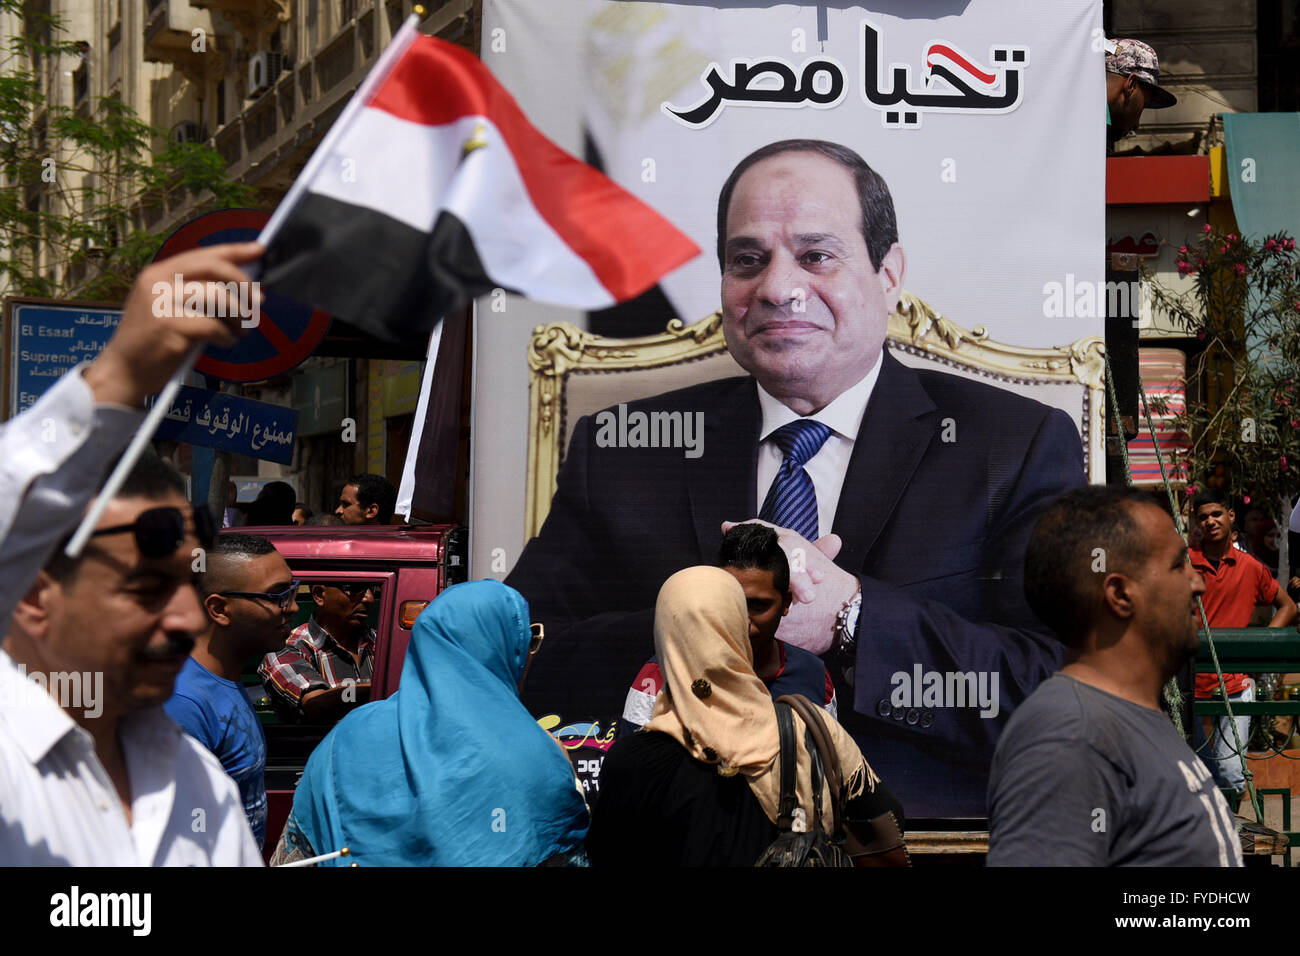 Cairo. 25th Apr, 2016. Supporters of Egypt's army and Egyptian President Abdel Fattah al-Sisi gather near the Tahrir Square as a way to celebrate the 34th Sinai Liberation Day in Cairo, Egypt on April 25, 2016. © Zhao Dingzhe/Xinhua/Alamy Live News Stock Photo